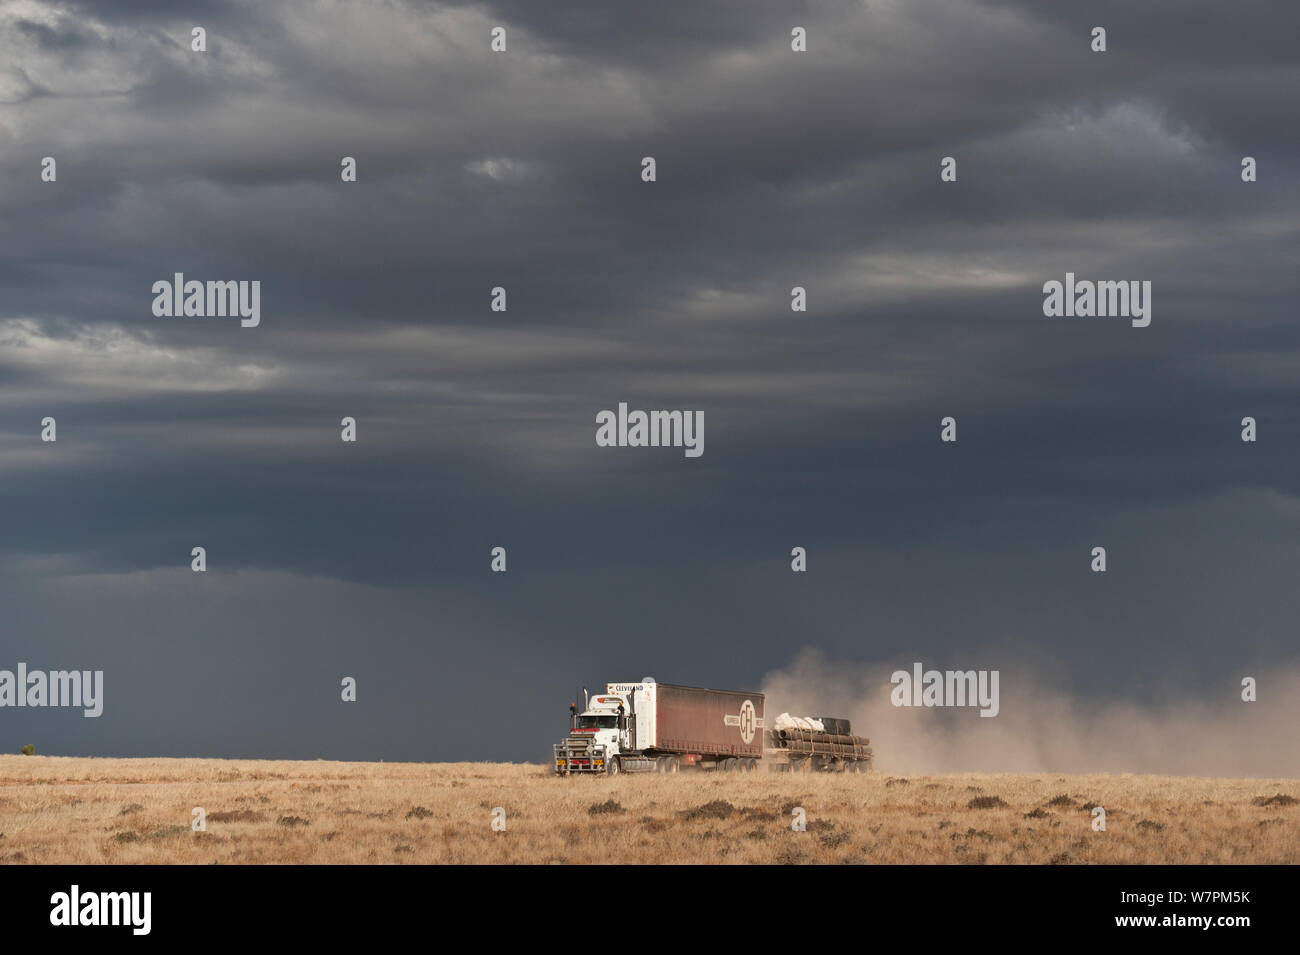 Bad weather looming ahead along the Strzelecki Track with a road train passing, South Australia Stock Photo